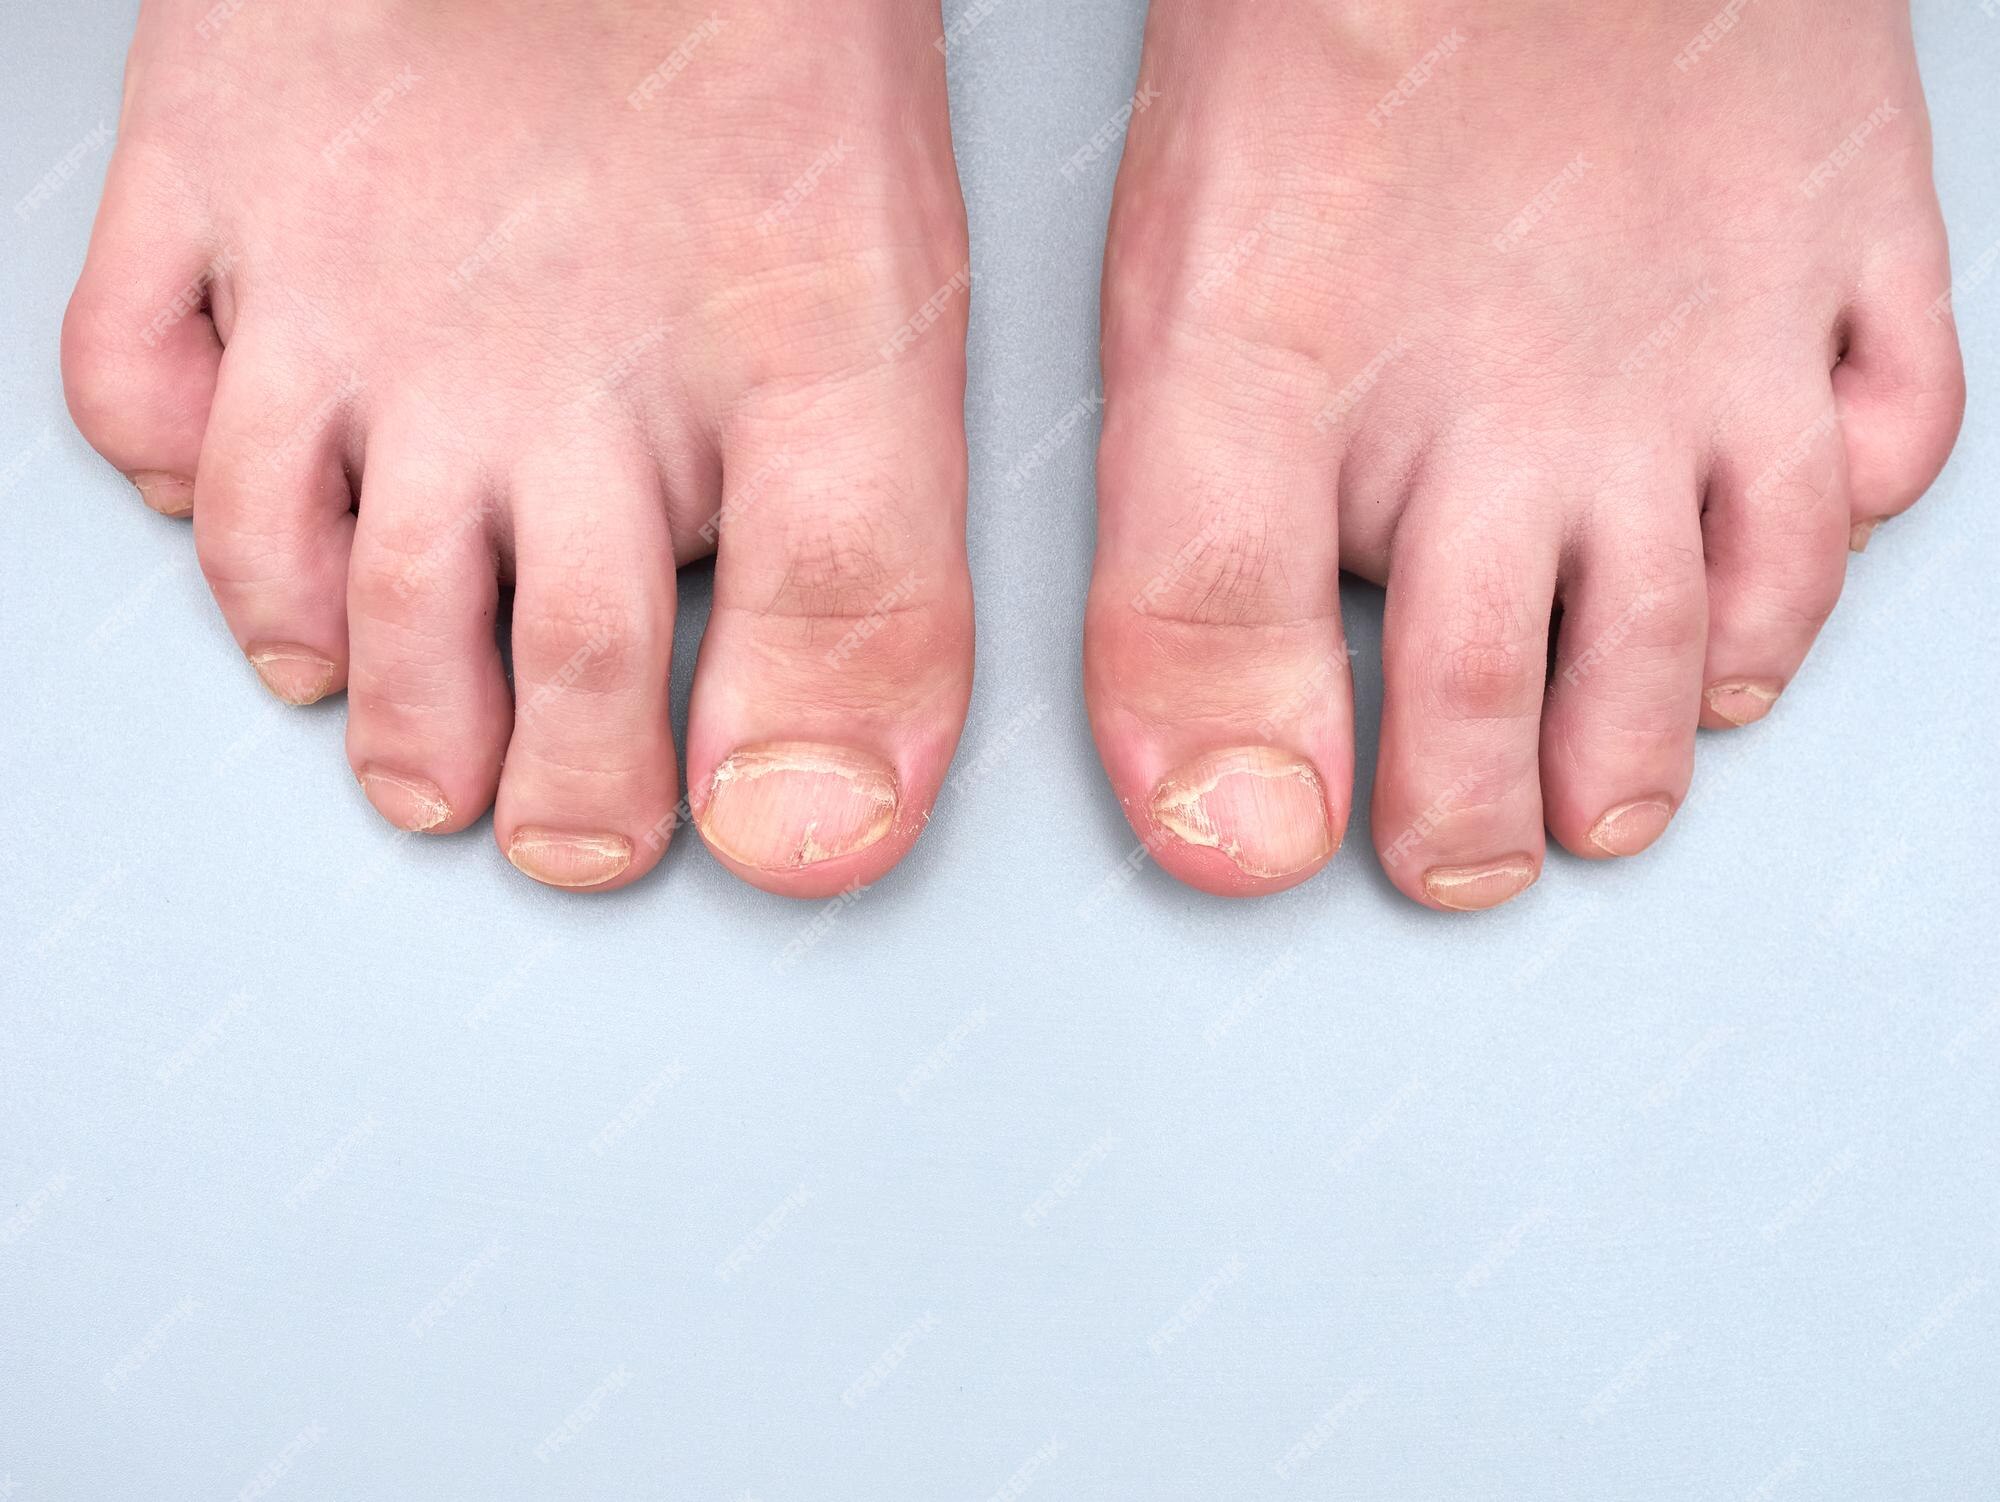 Premium Photo | Toenails of a 9 year old boy with a nail disease very weak  or brittle nails isolated on gray background